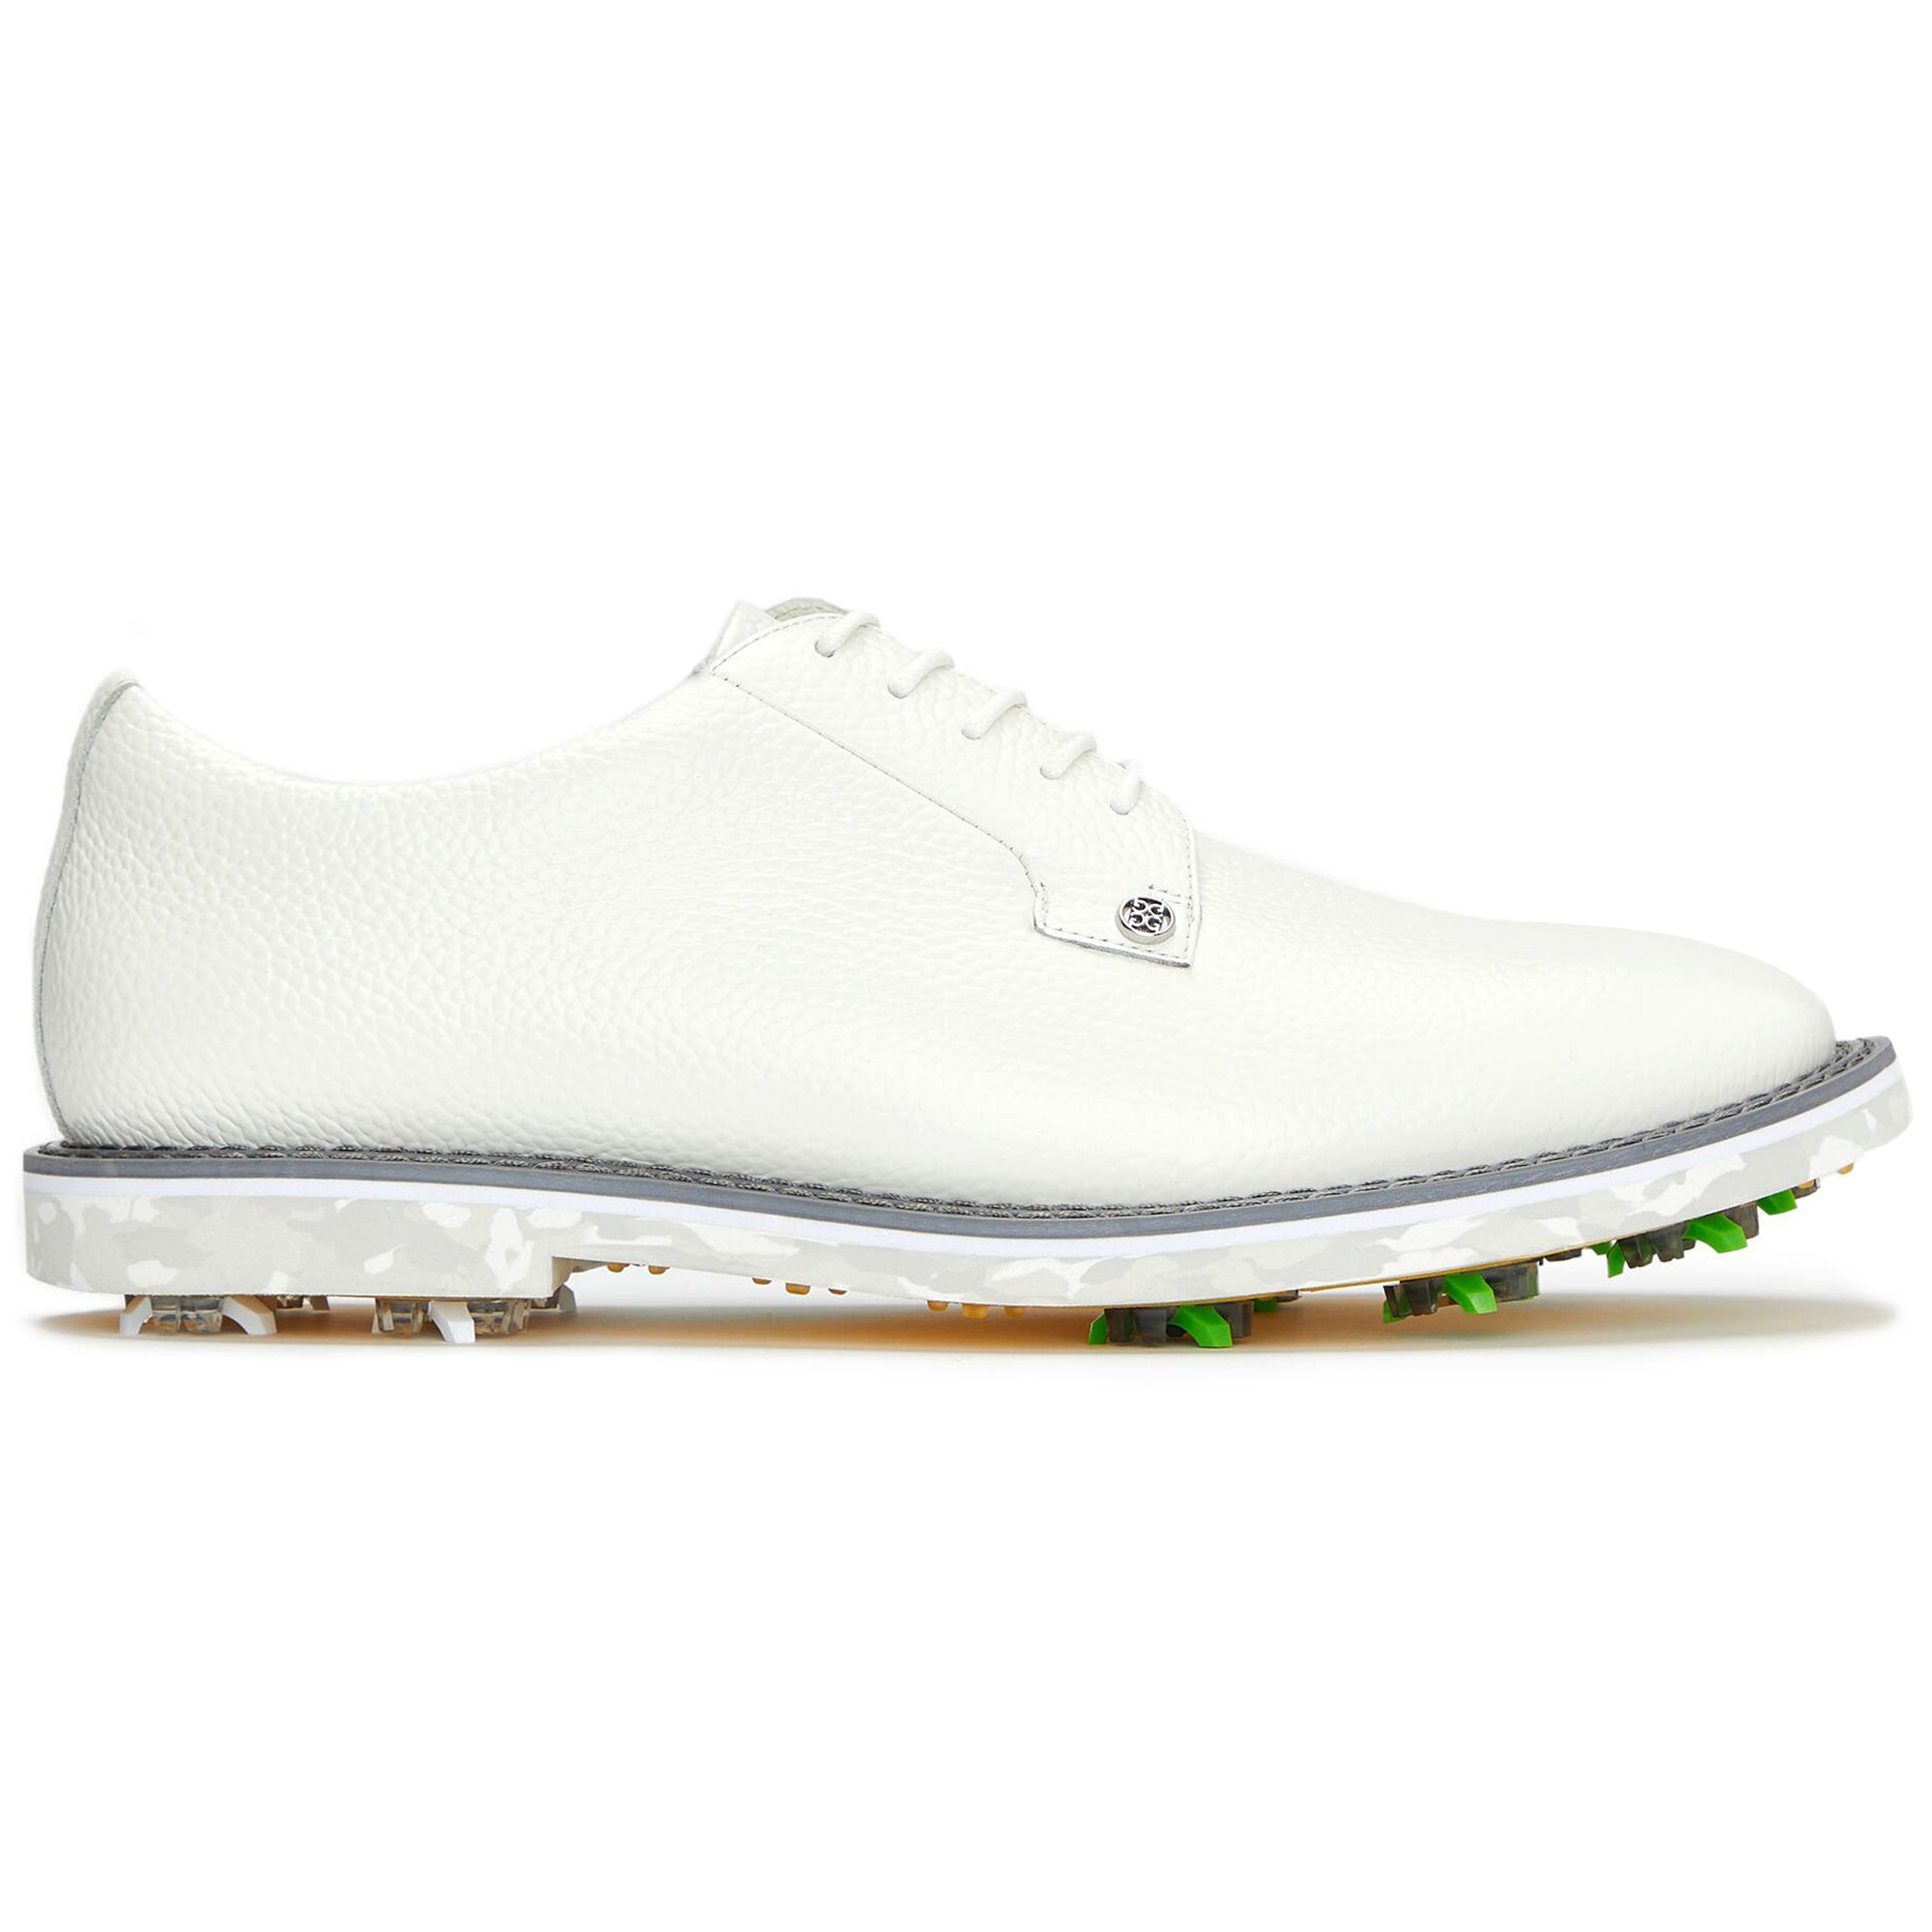 g-fore-gallivanter-g-lock-pebble-leather-golf-shoes-gmf000055-snow